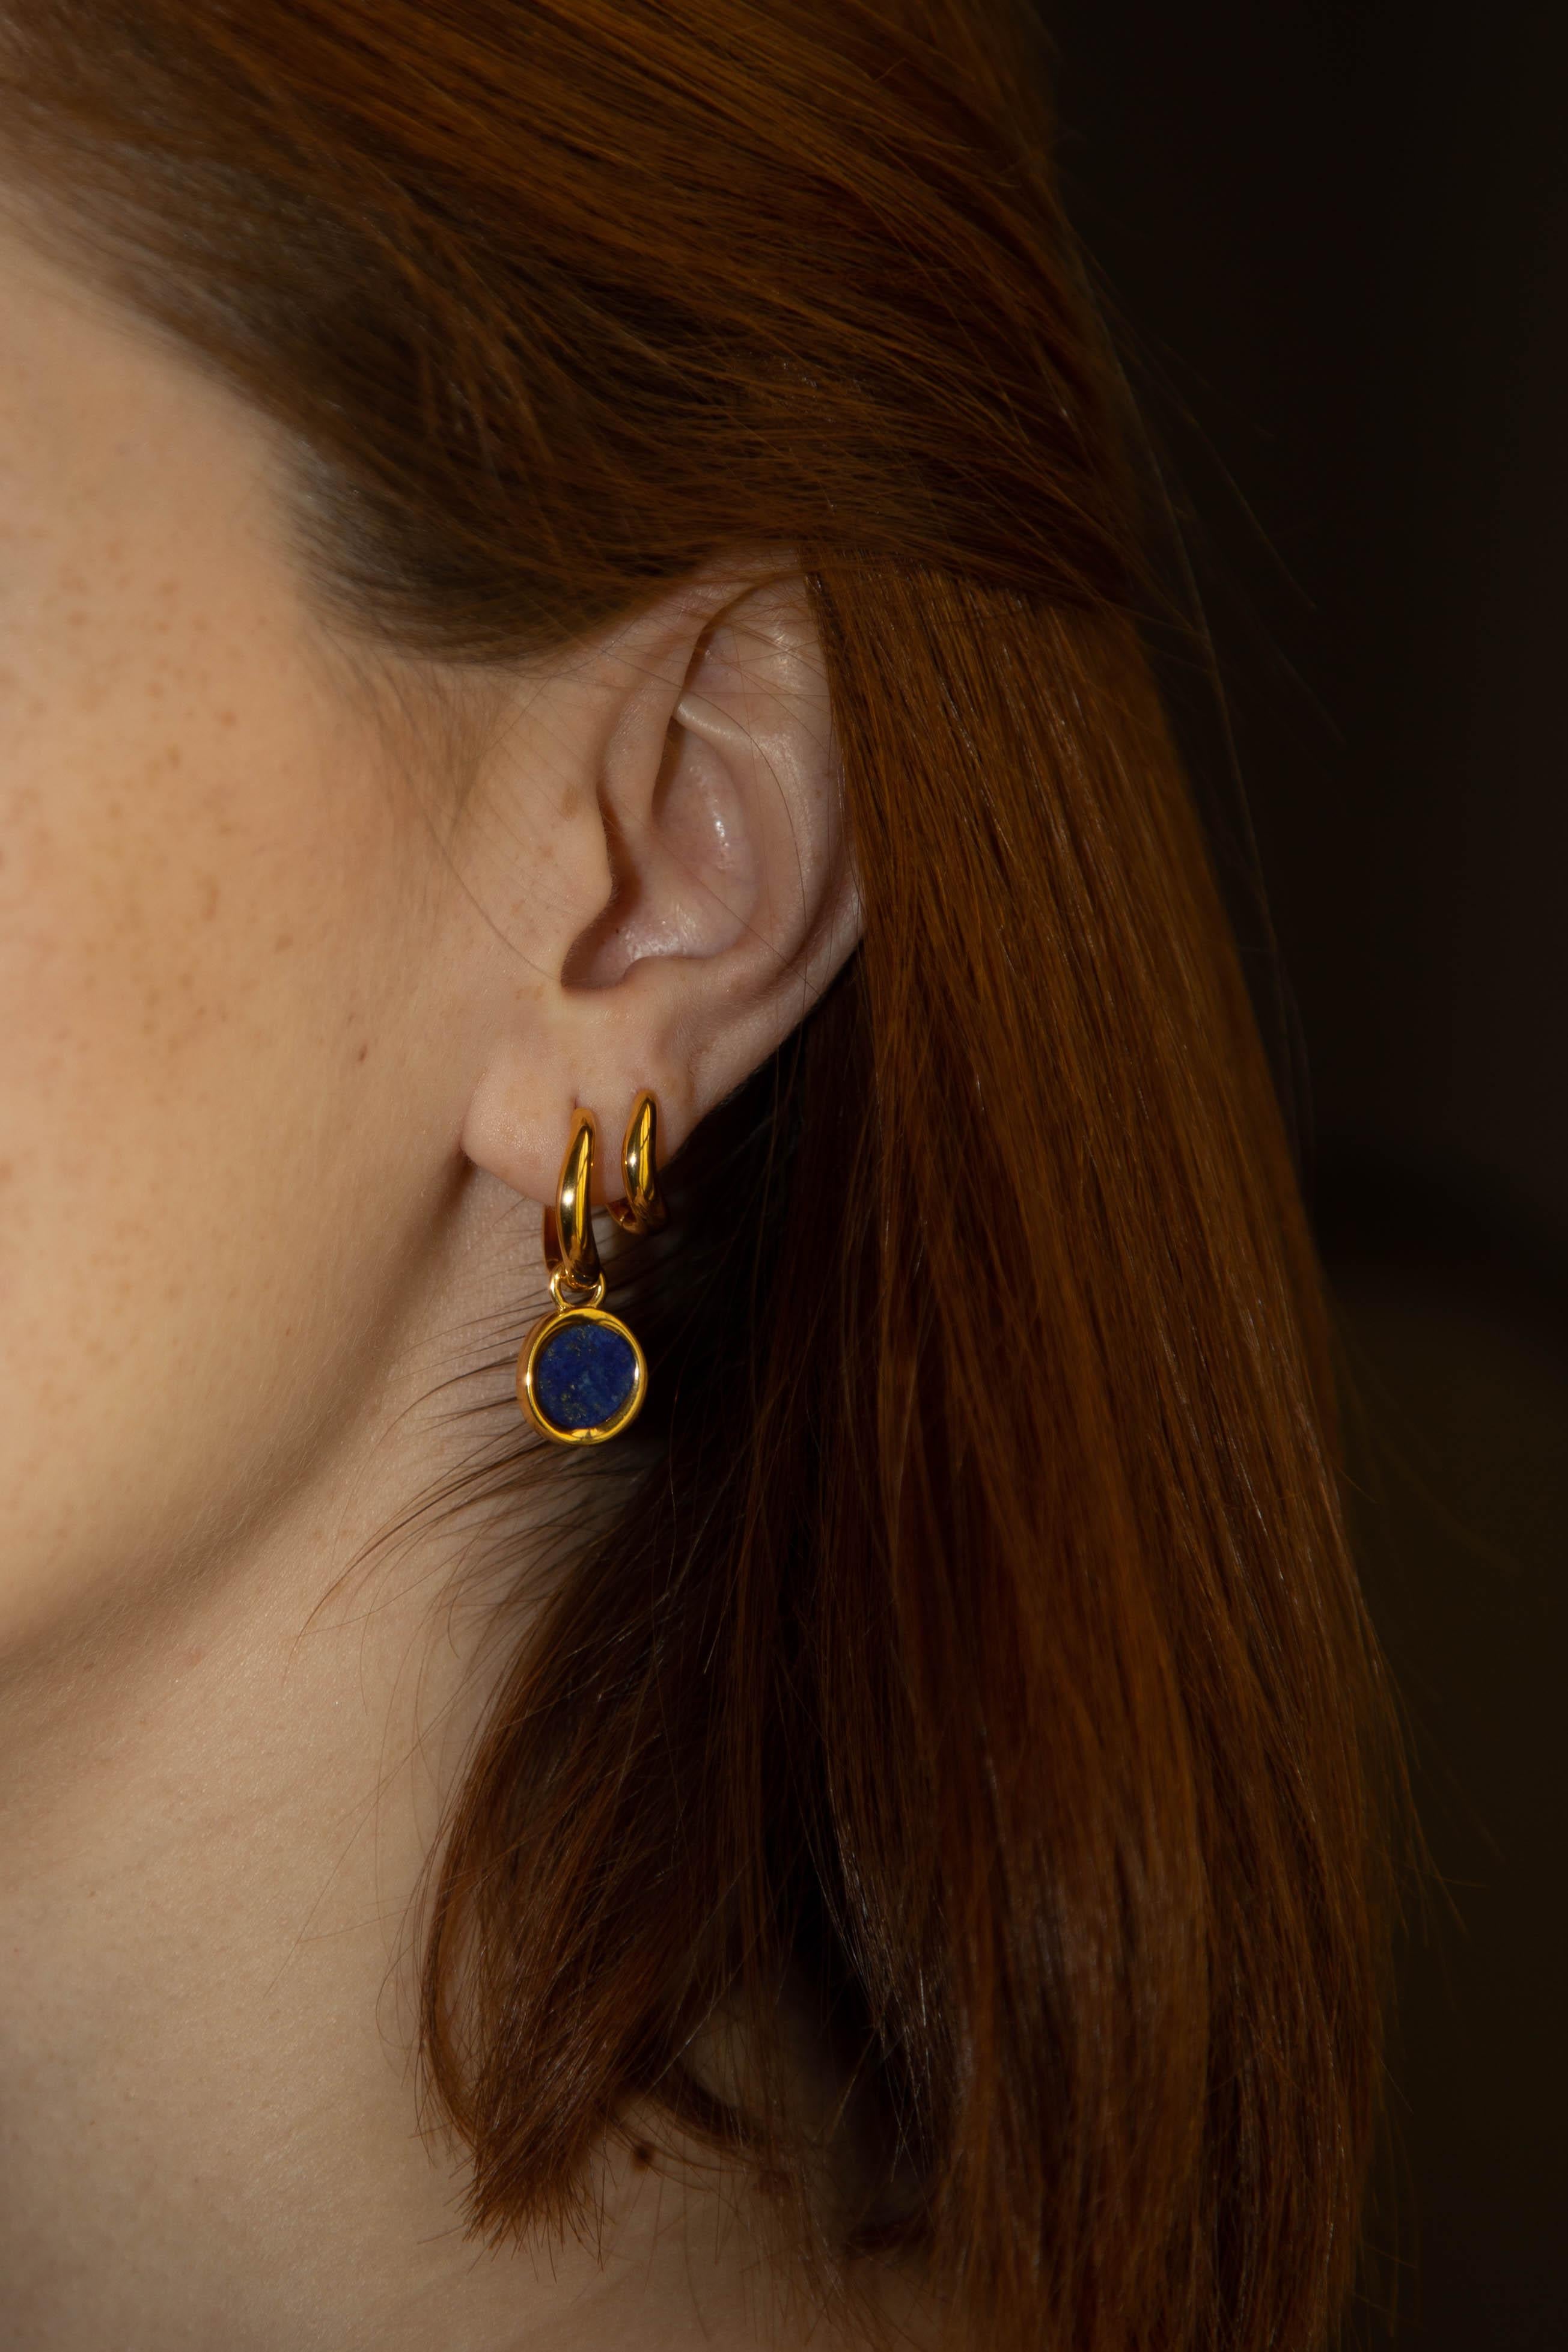 Portrait Cut Boomerang Mini Hoops 18k Solid Gold with Lapis Lazuli on Both Hoops For Sale